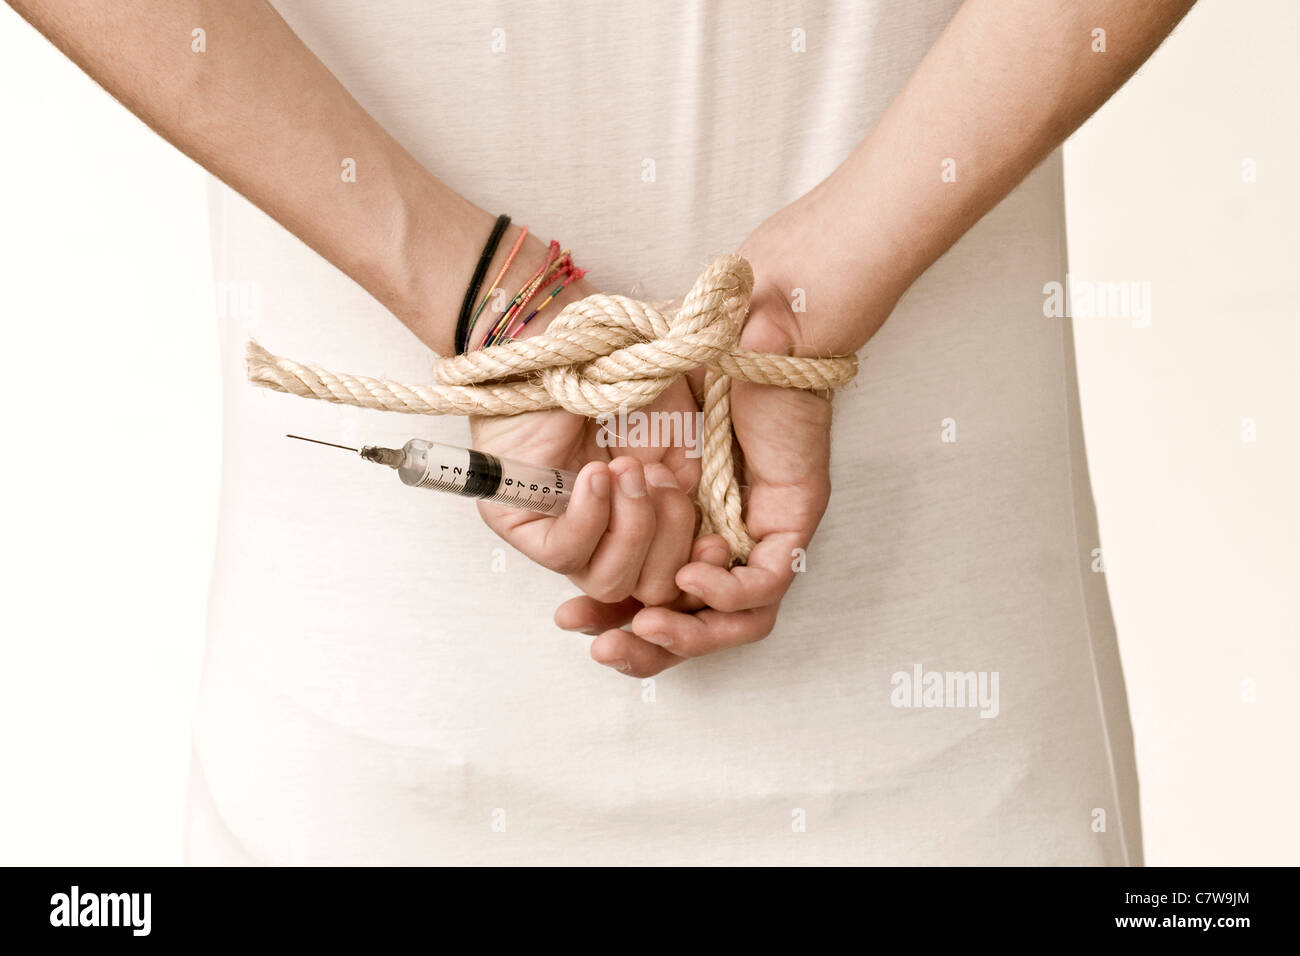 Man with hands tied up with holding syringe Stock Photo - Alamy